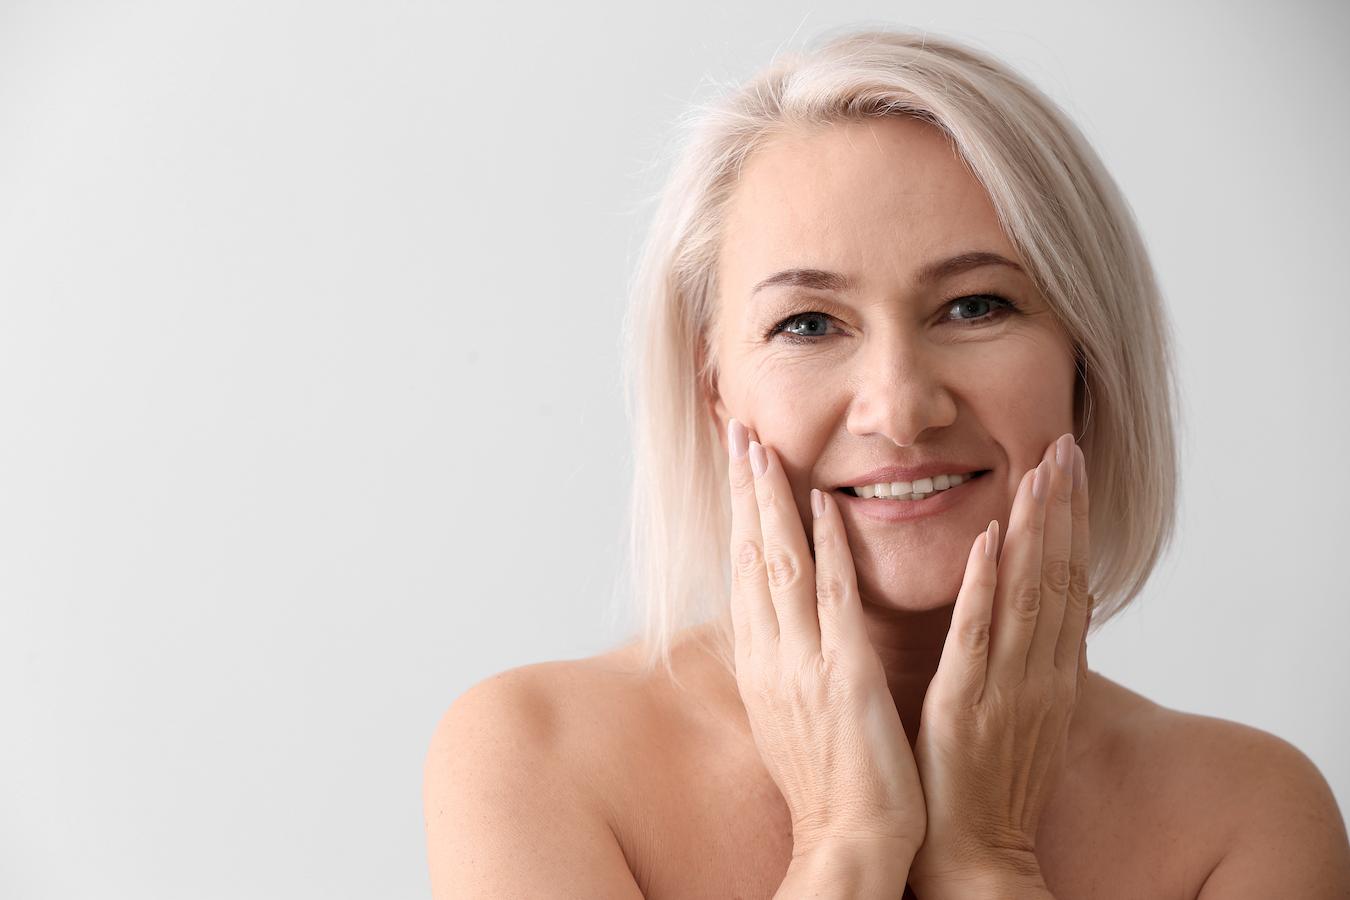 Practicing a consistent daily skin care regimen will help make your skin look younger